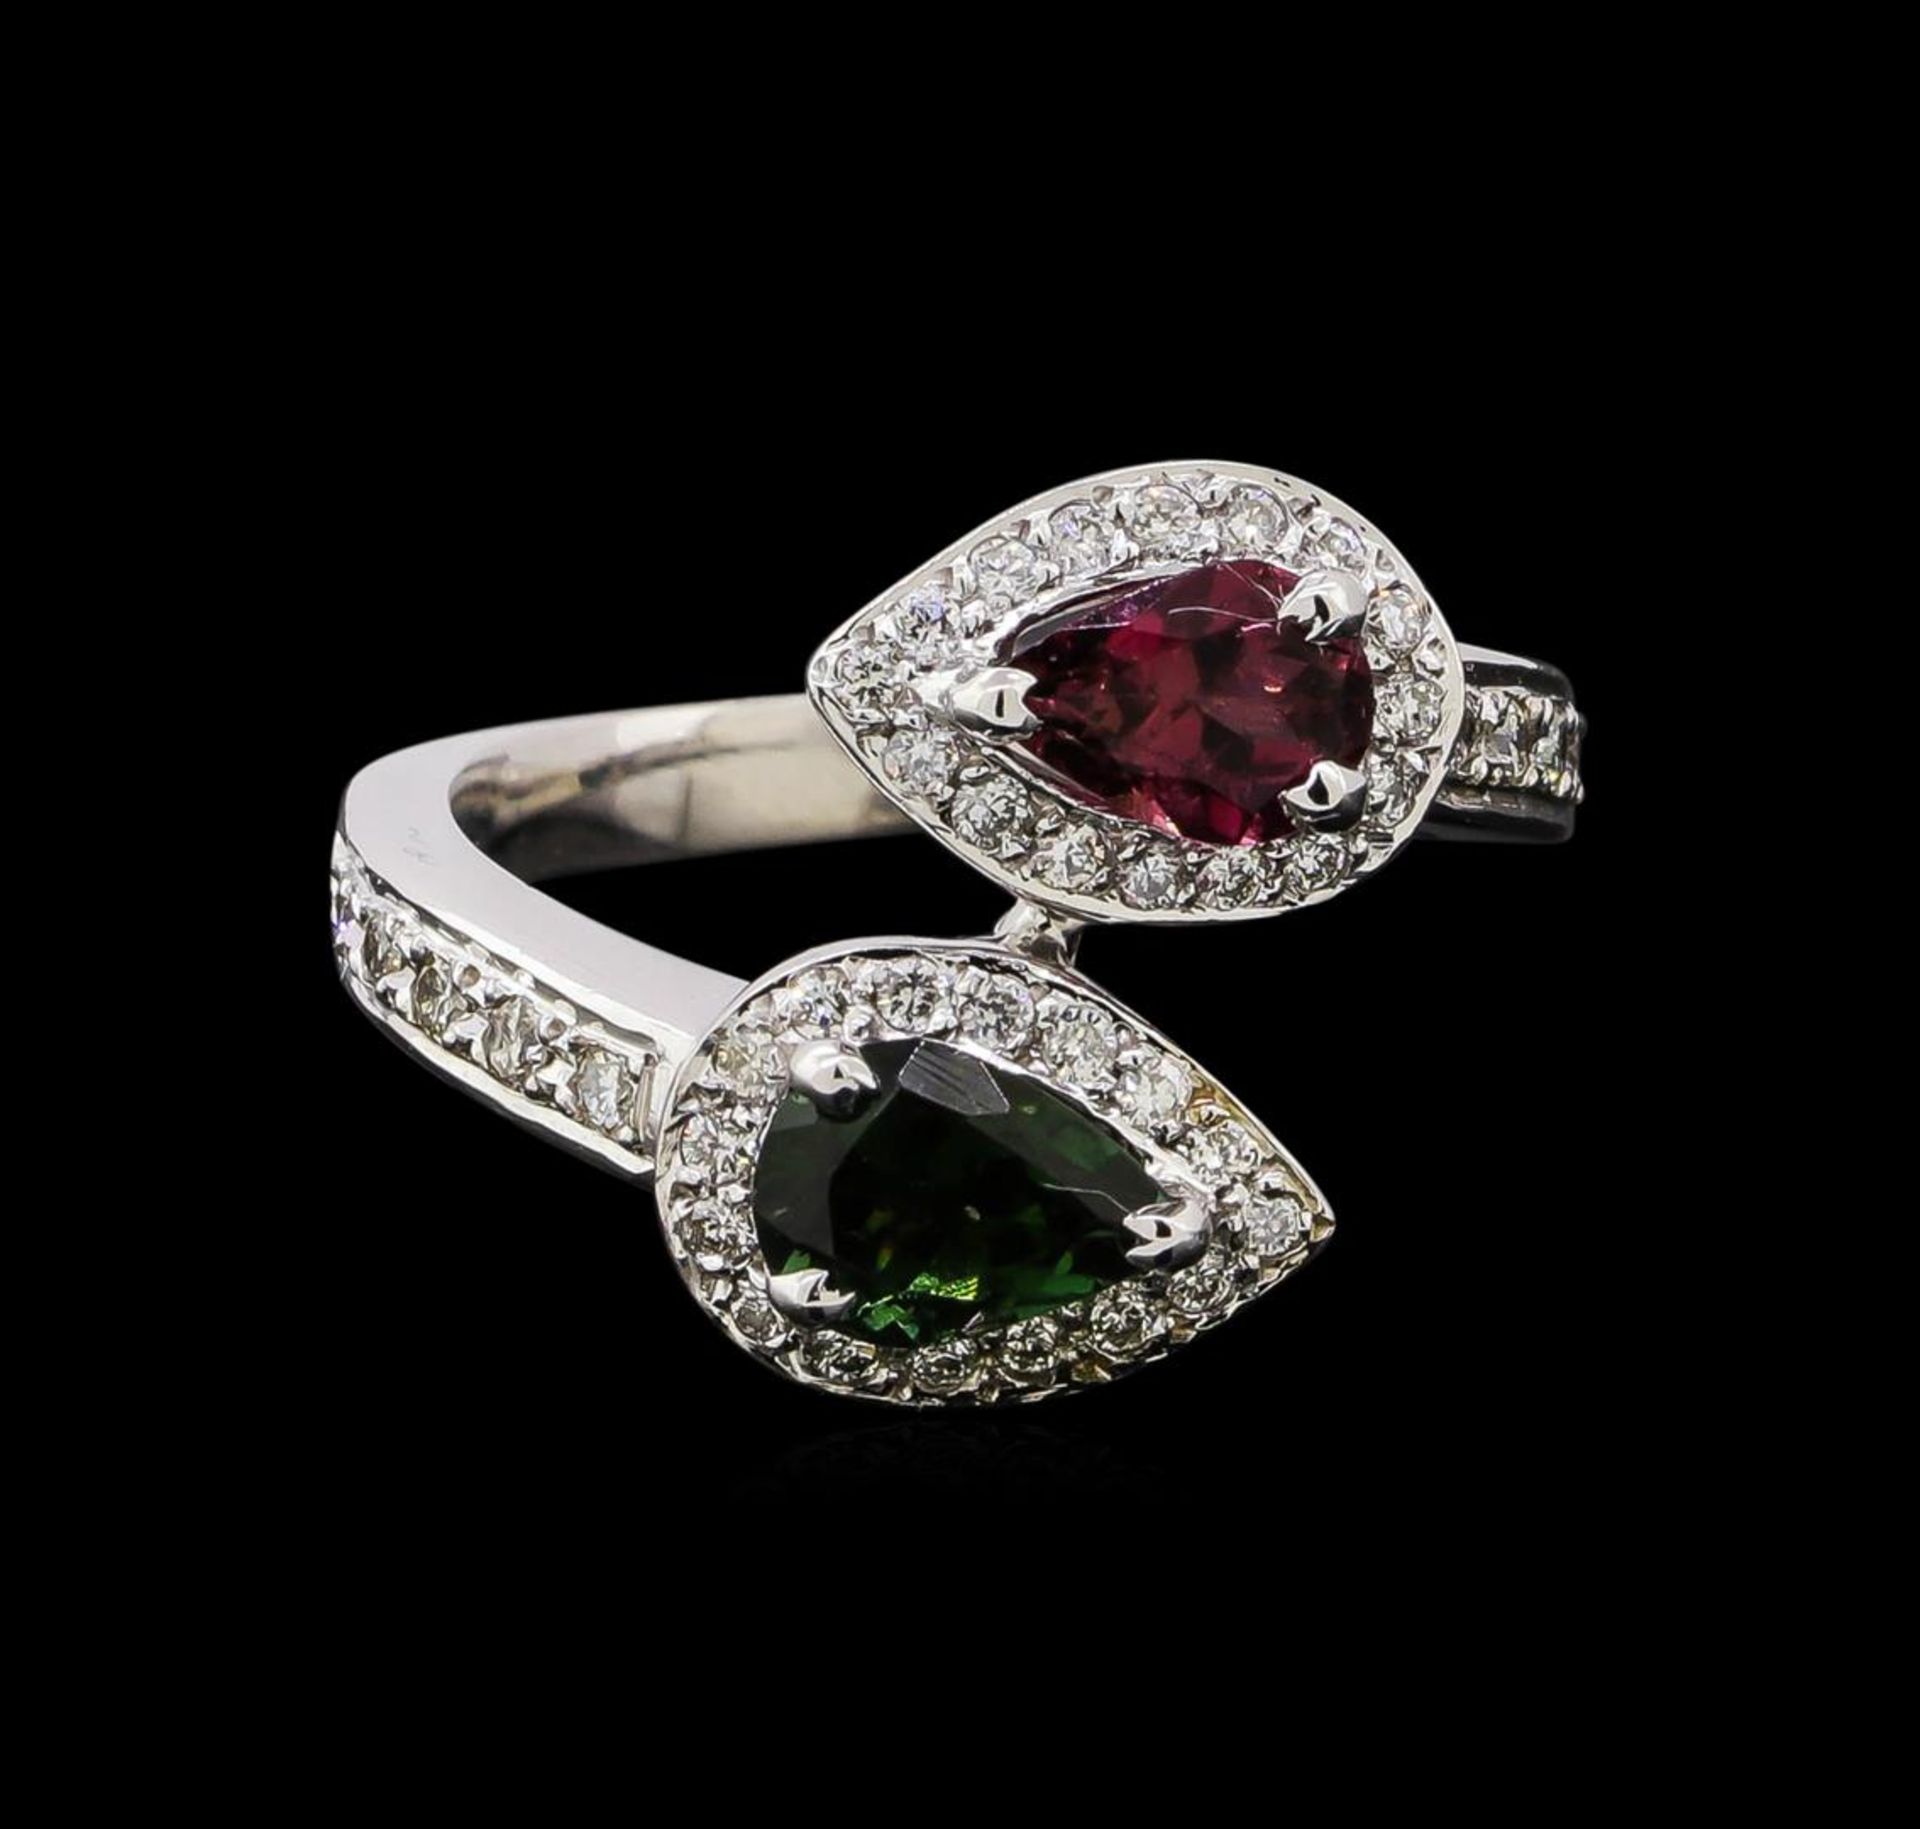 1.22 ctw Tourmaline and Diamond Ring - 14KT White Gold - Image 2 of 4